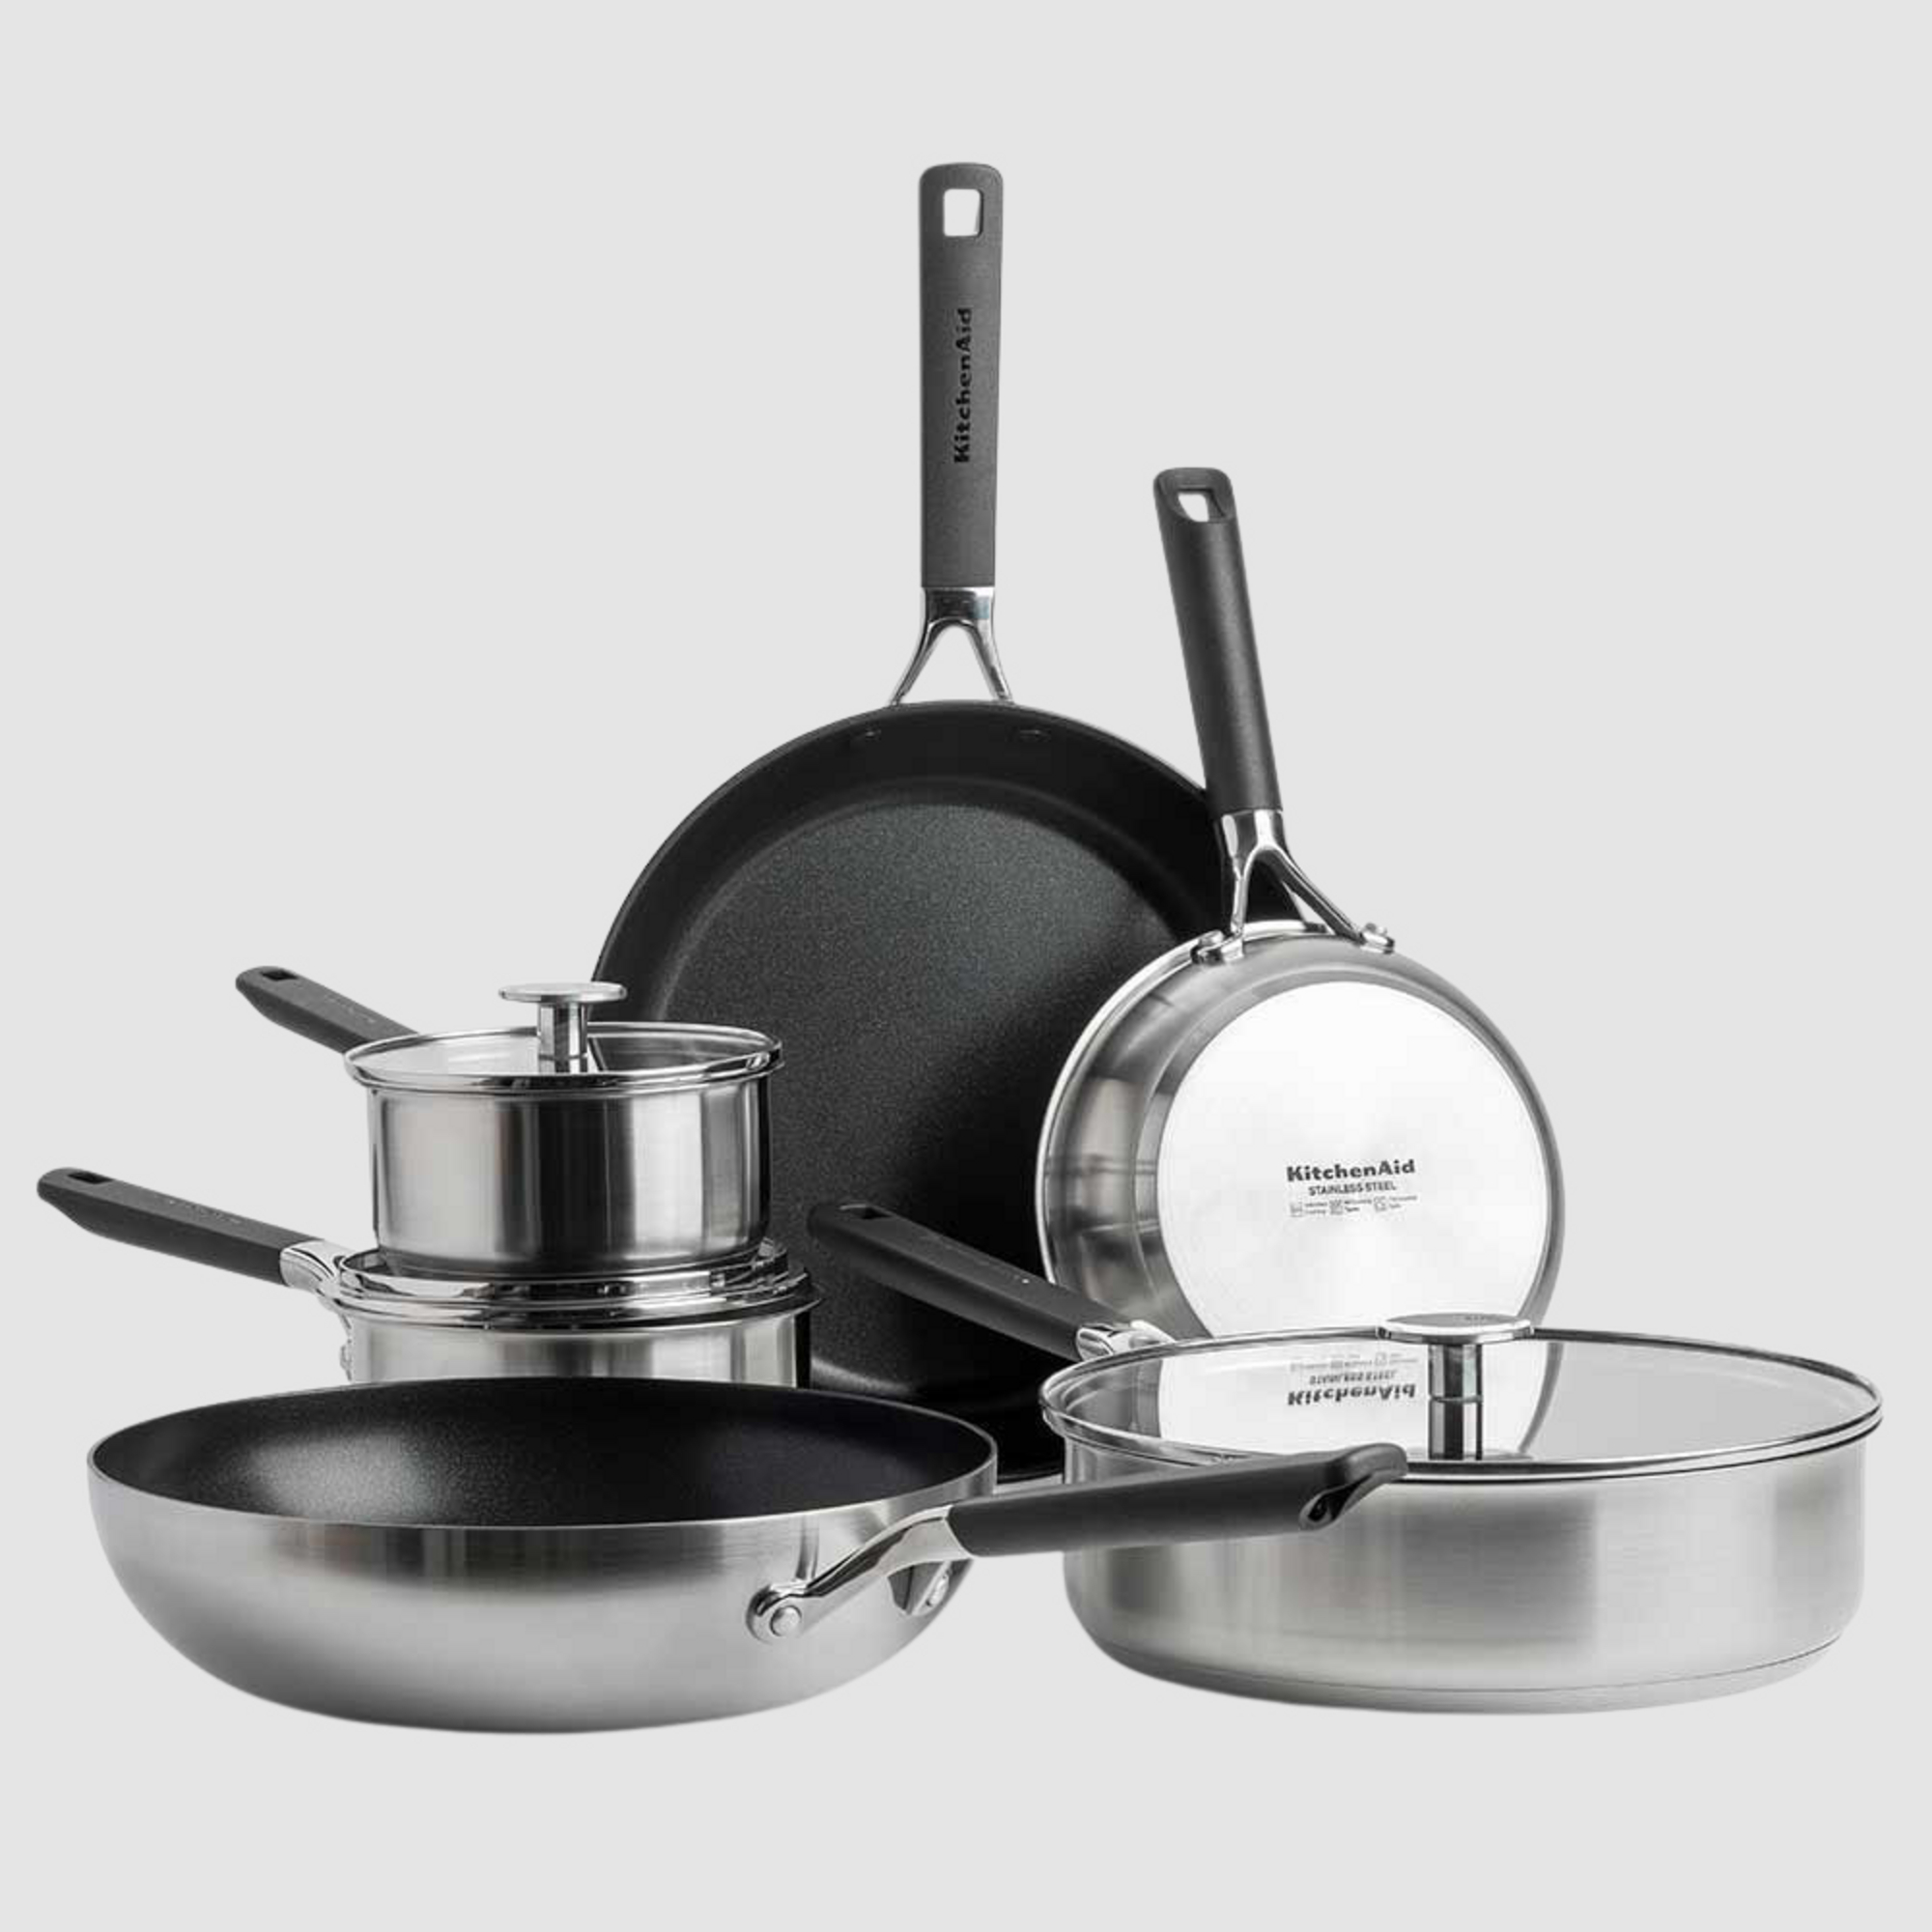 KitchenAid Classic Stainless Steel Cookware Set 9 Piece